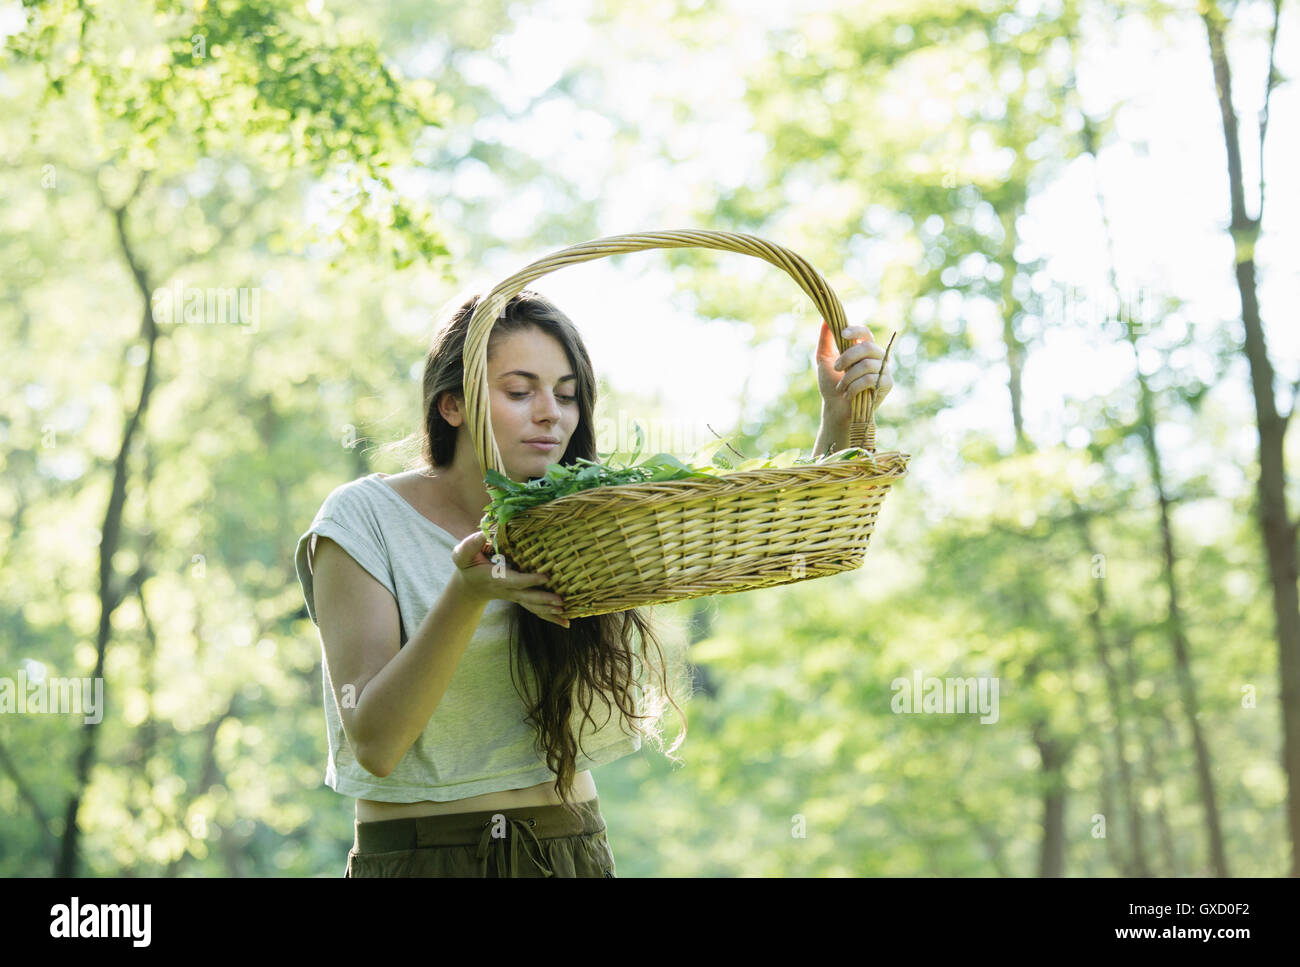 Young woman smelling foraged wild herbs in forest, Vogogna, Verbania, Piemonte, Italy Stock Photo